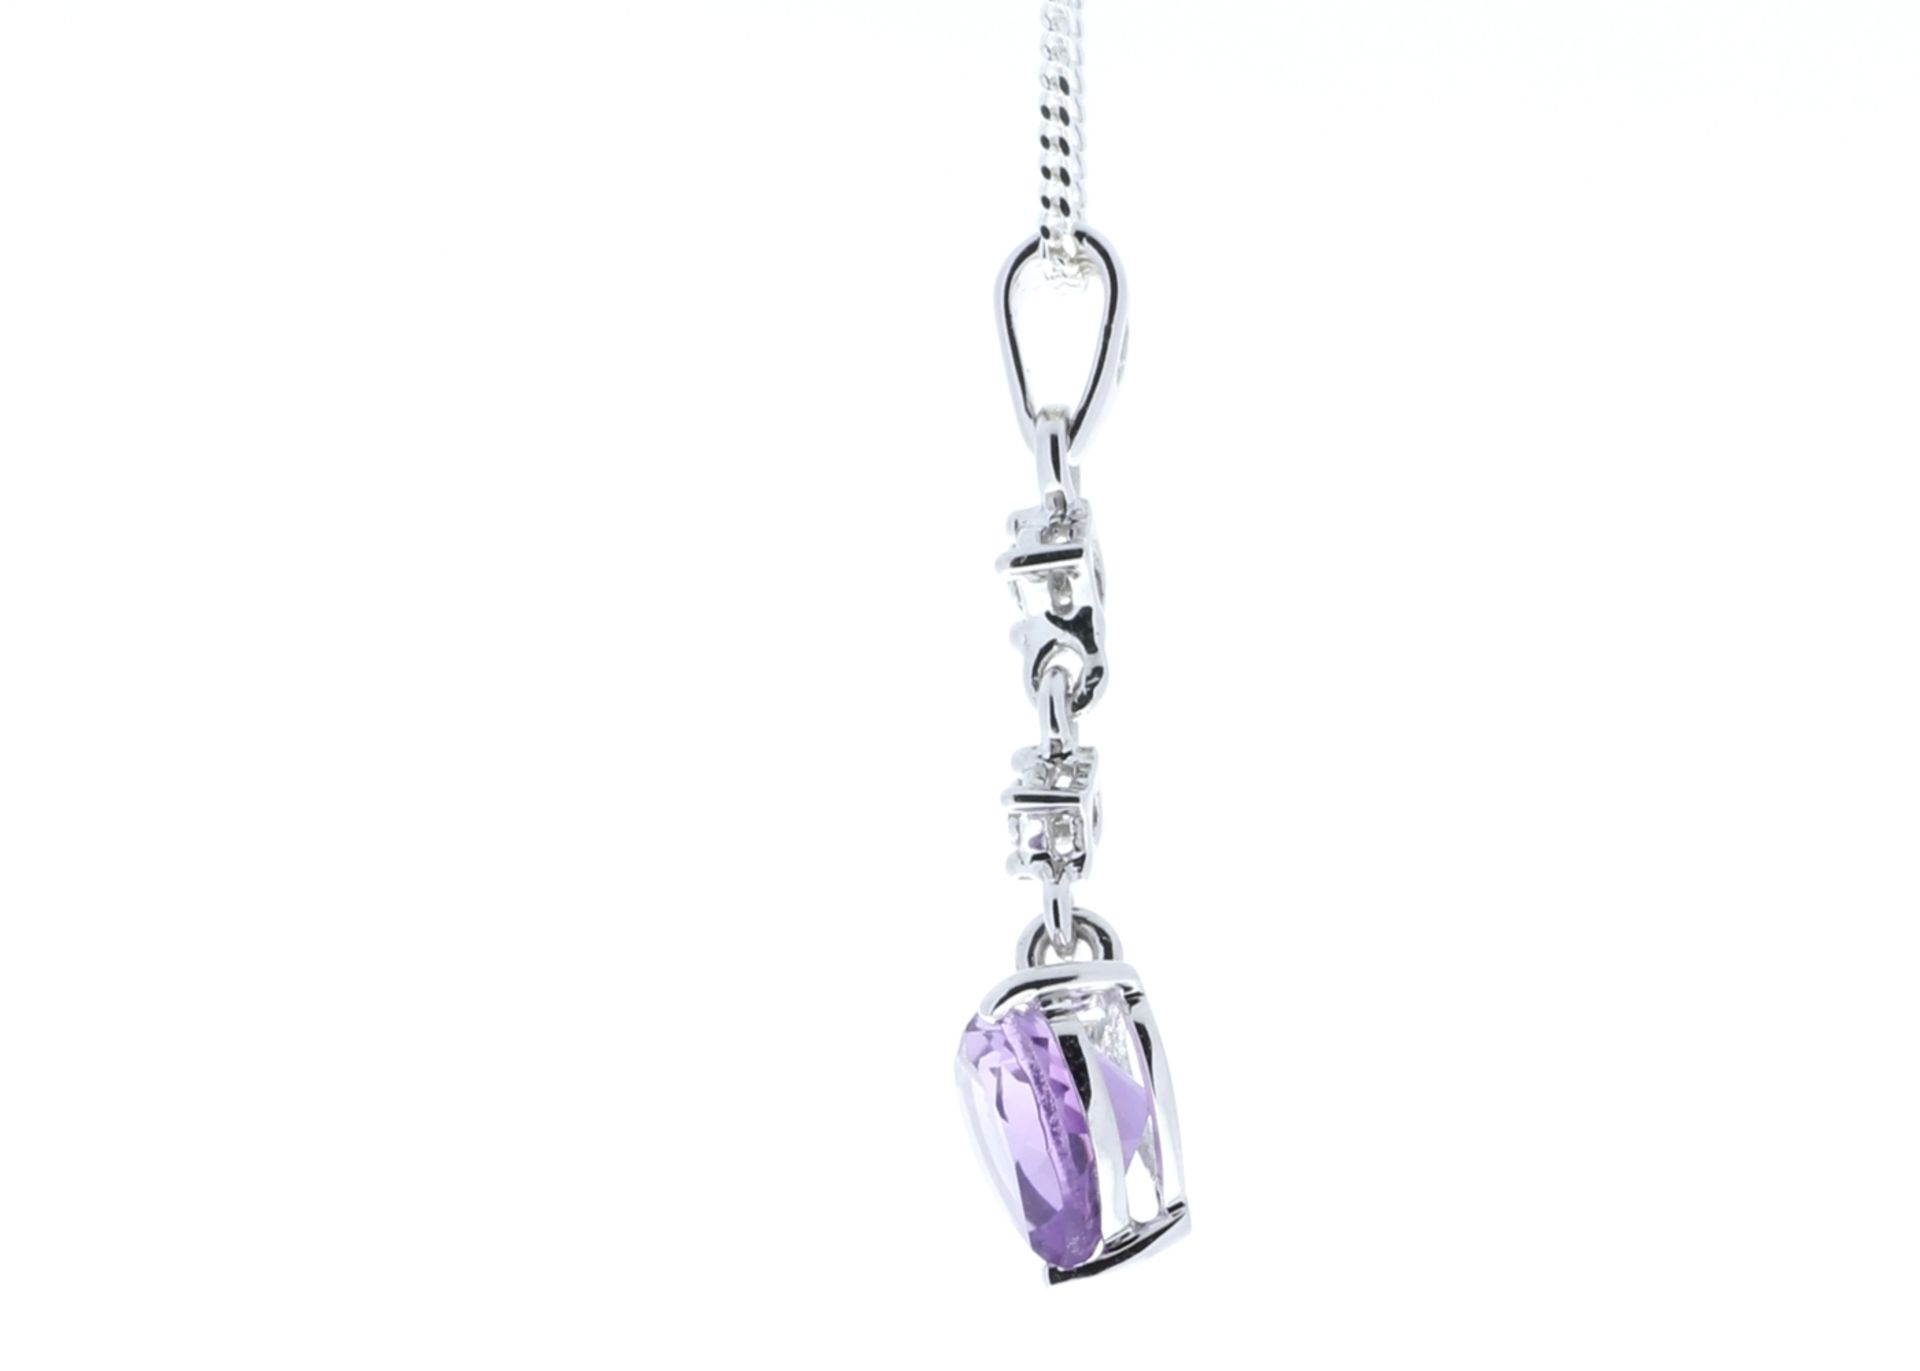 9ct White Gold Amethyst Heart Shape Diamond Pendant 0.01 Carats - Valued by GIE £420.00 - This - Image 2 of 5